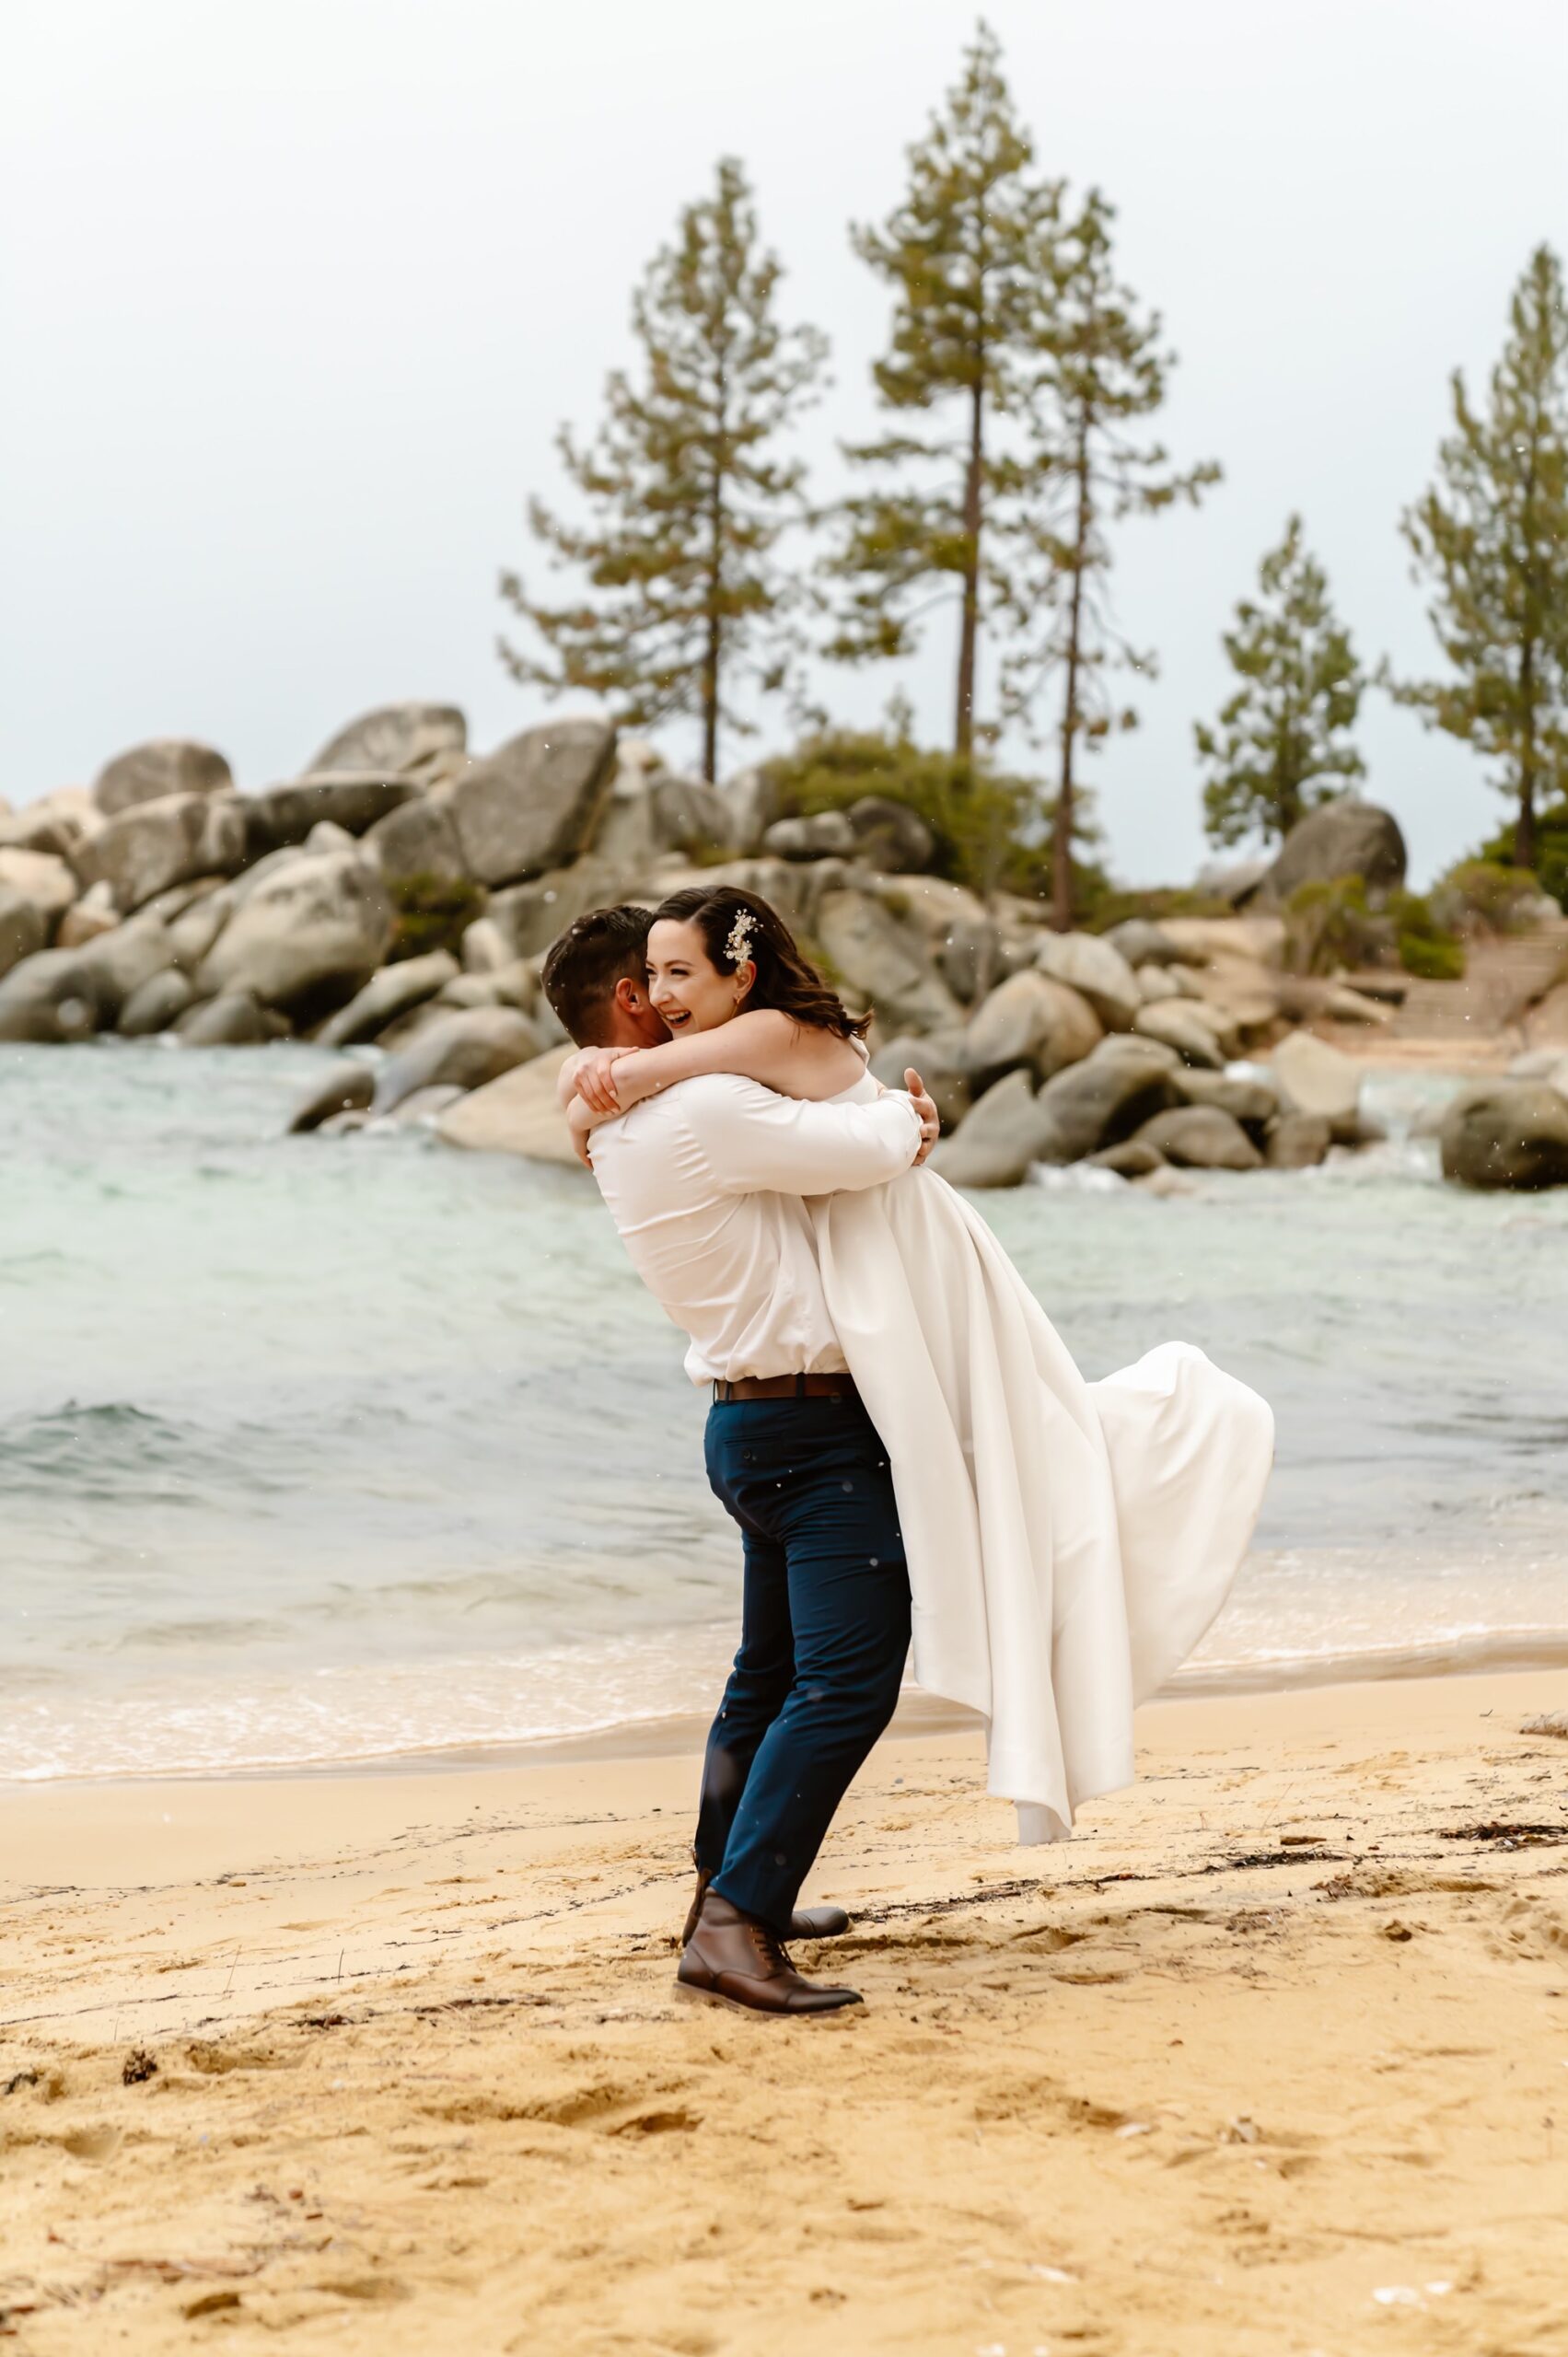 Bride and groom hug at their snowy elopement